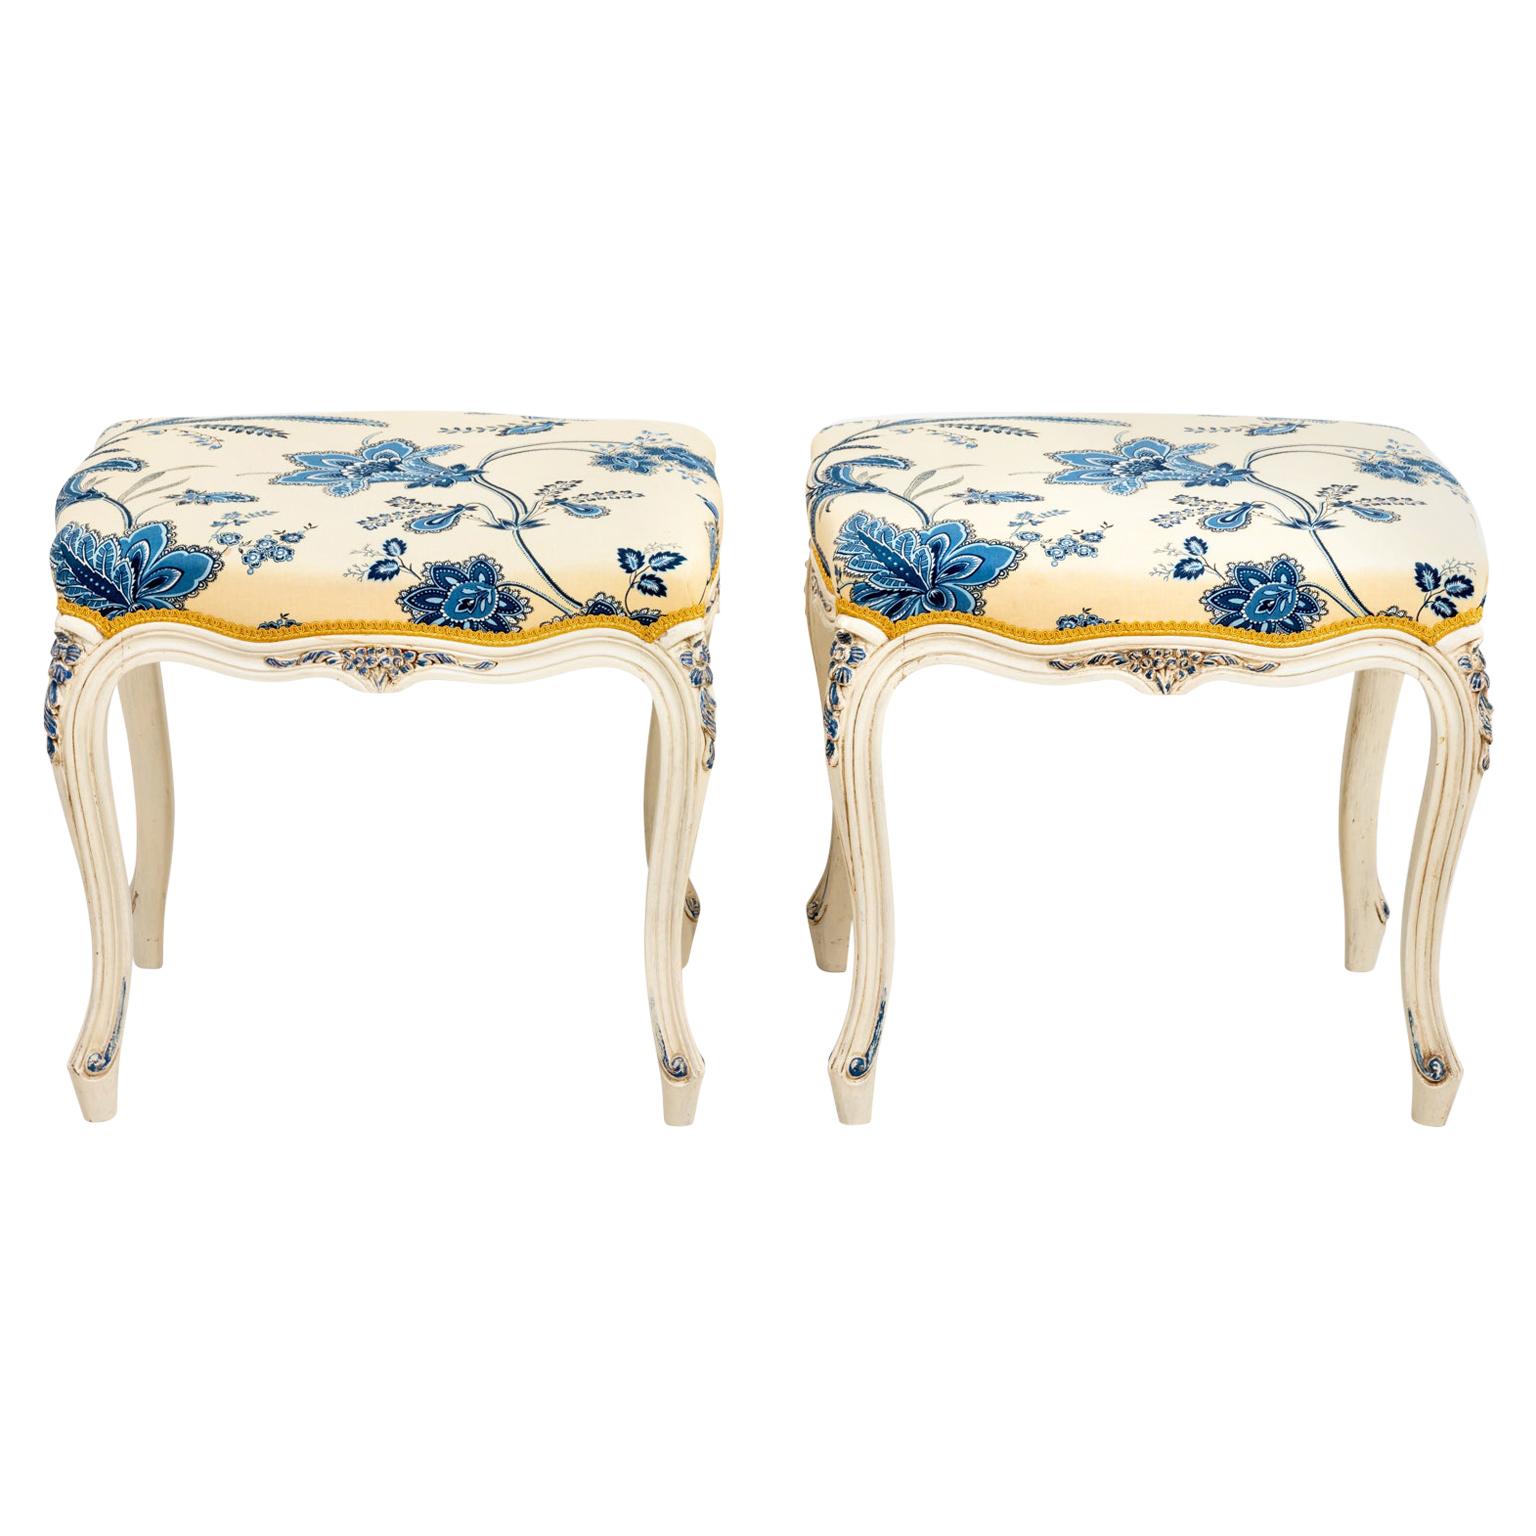 Pair of French Upholstered Benches